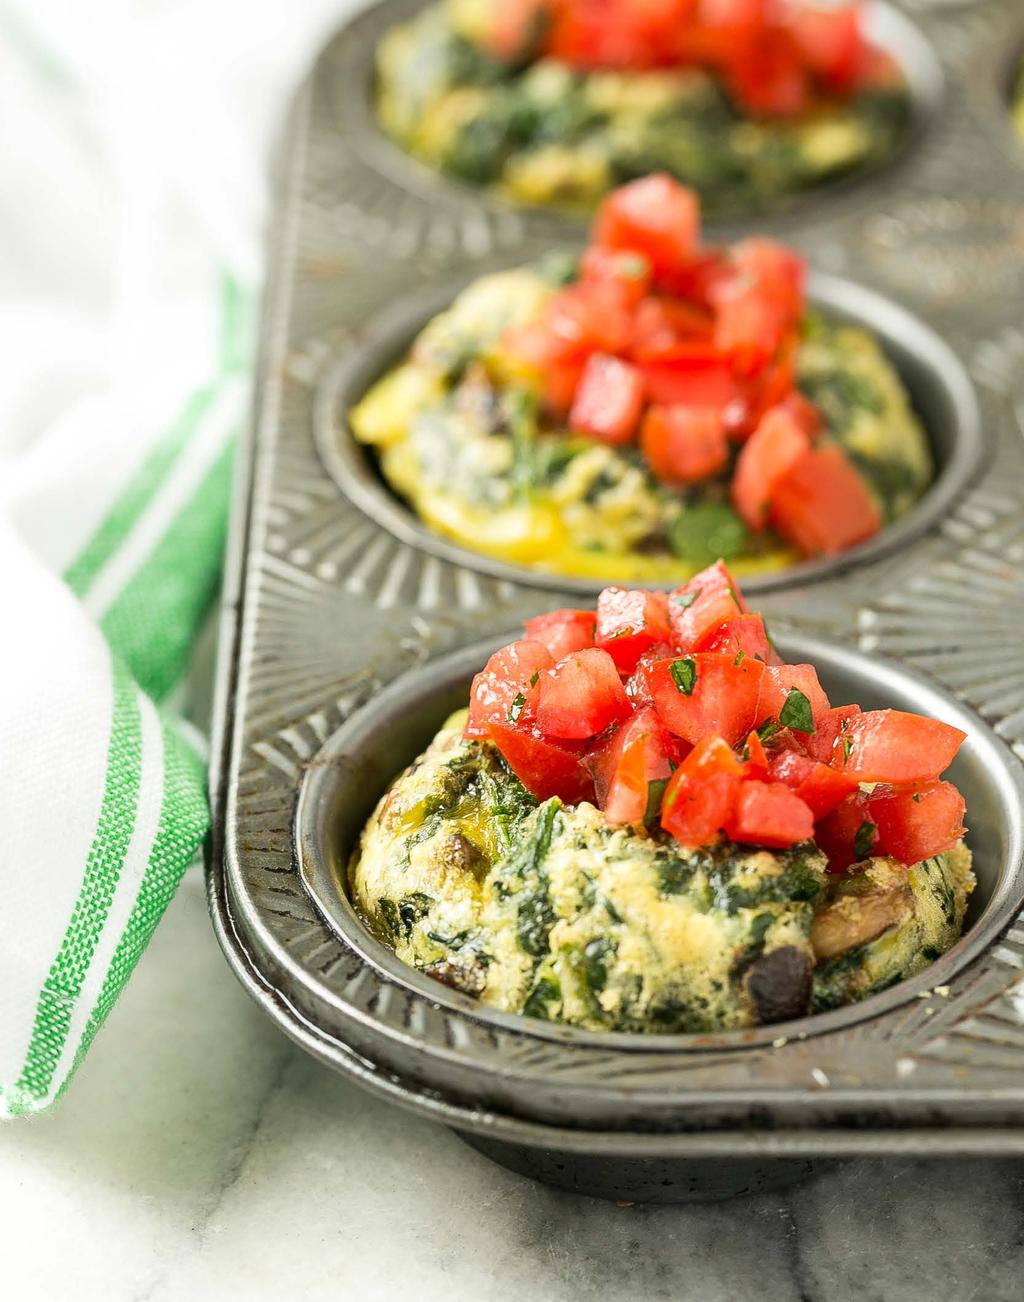 11. Veggie Omelet Muffins These miniature spinach and mushroom omelets bake up in the oven, make a large batch and warm them for breakfast each day.